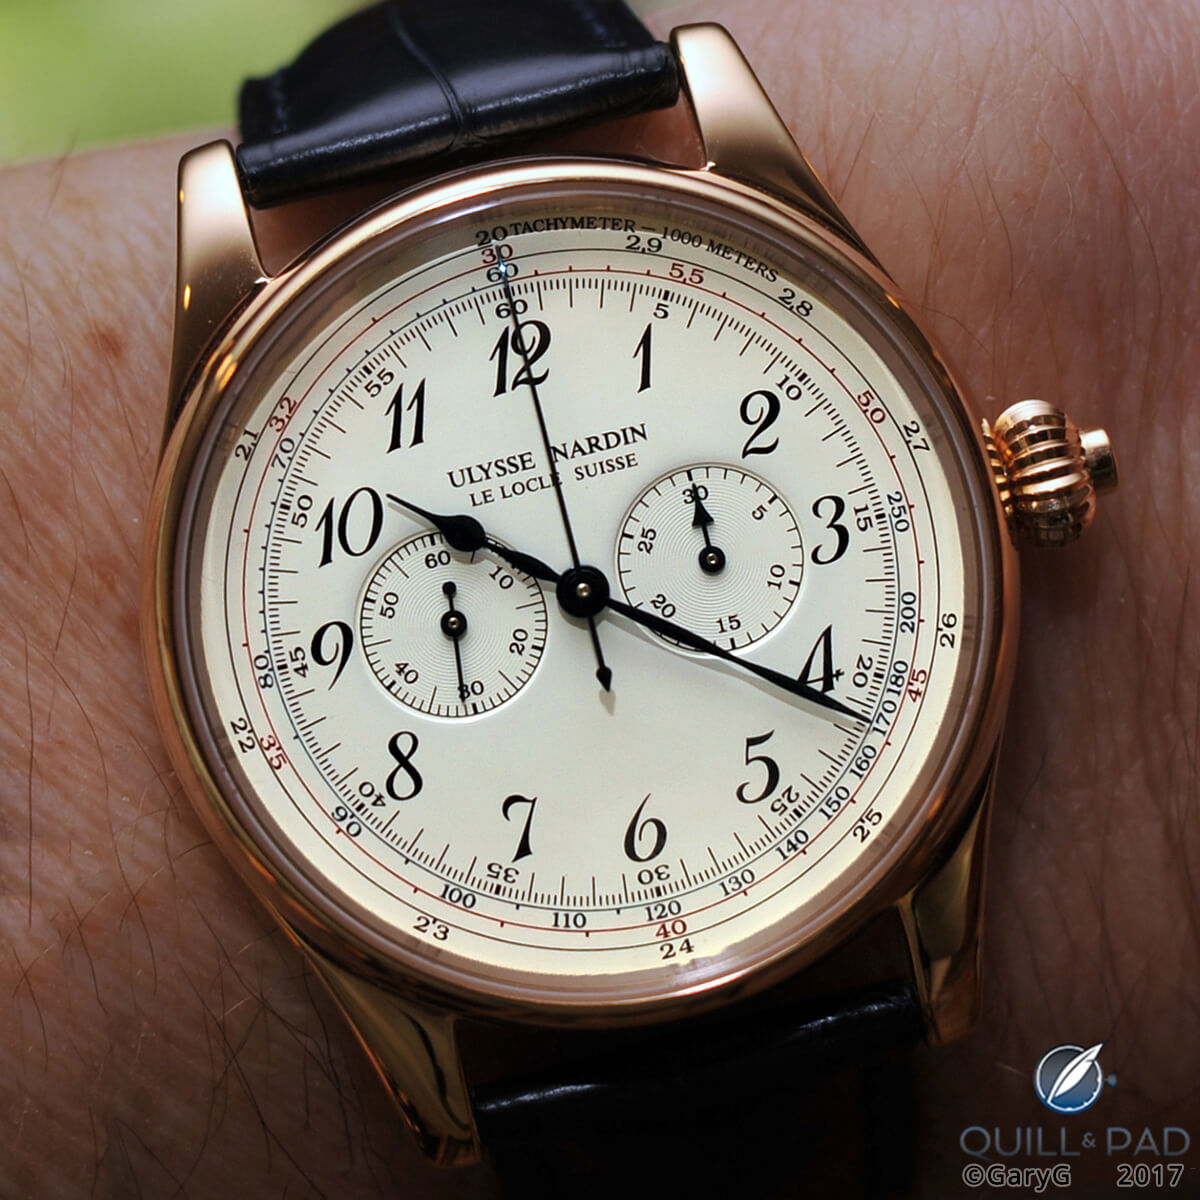 On the wrist: Ulysse Nardin Monopoussoir chronograph with movement designed by F.P. Journe